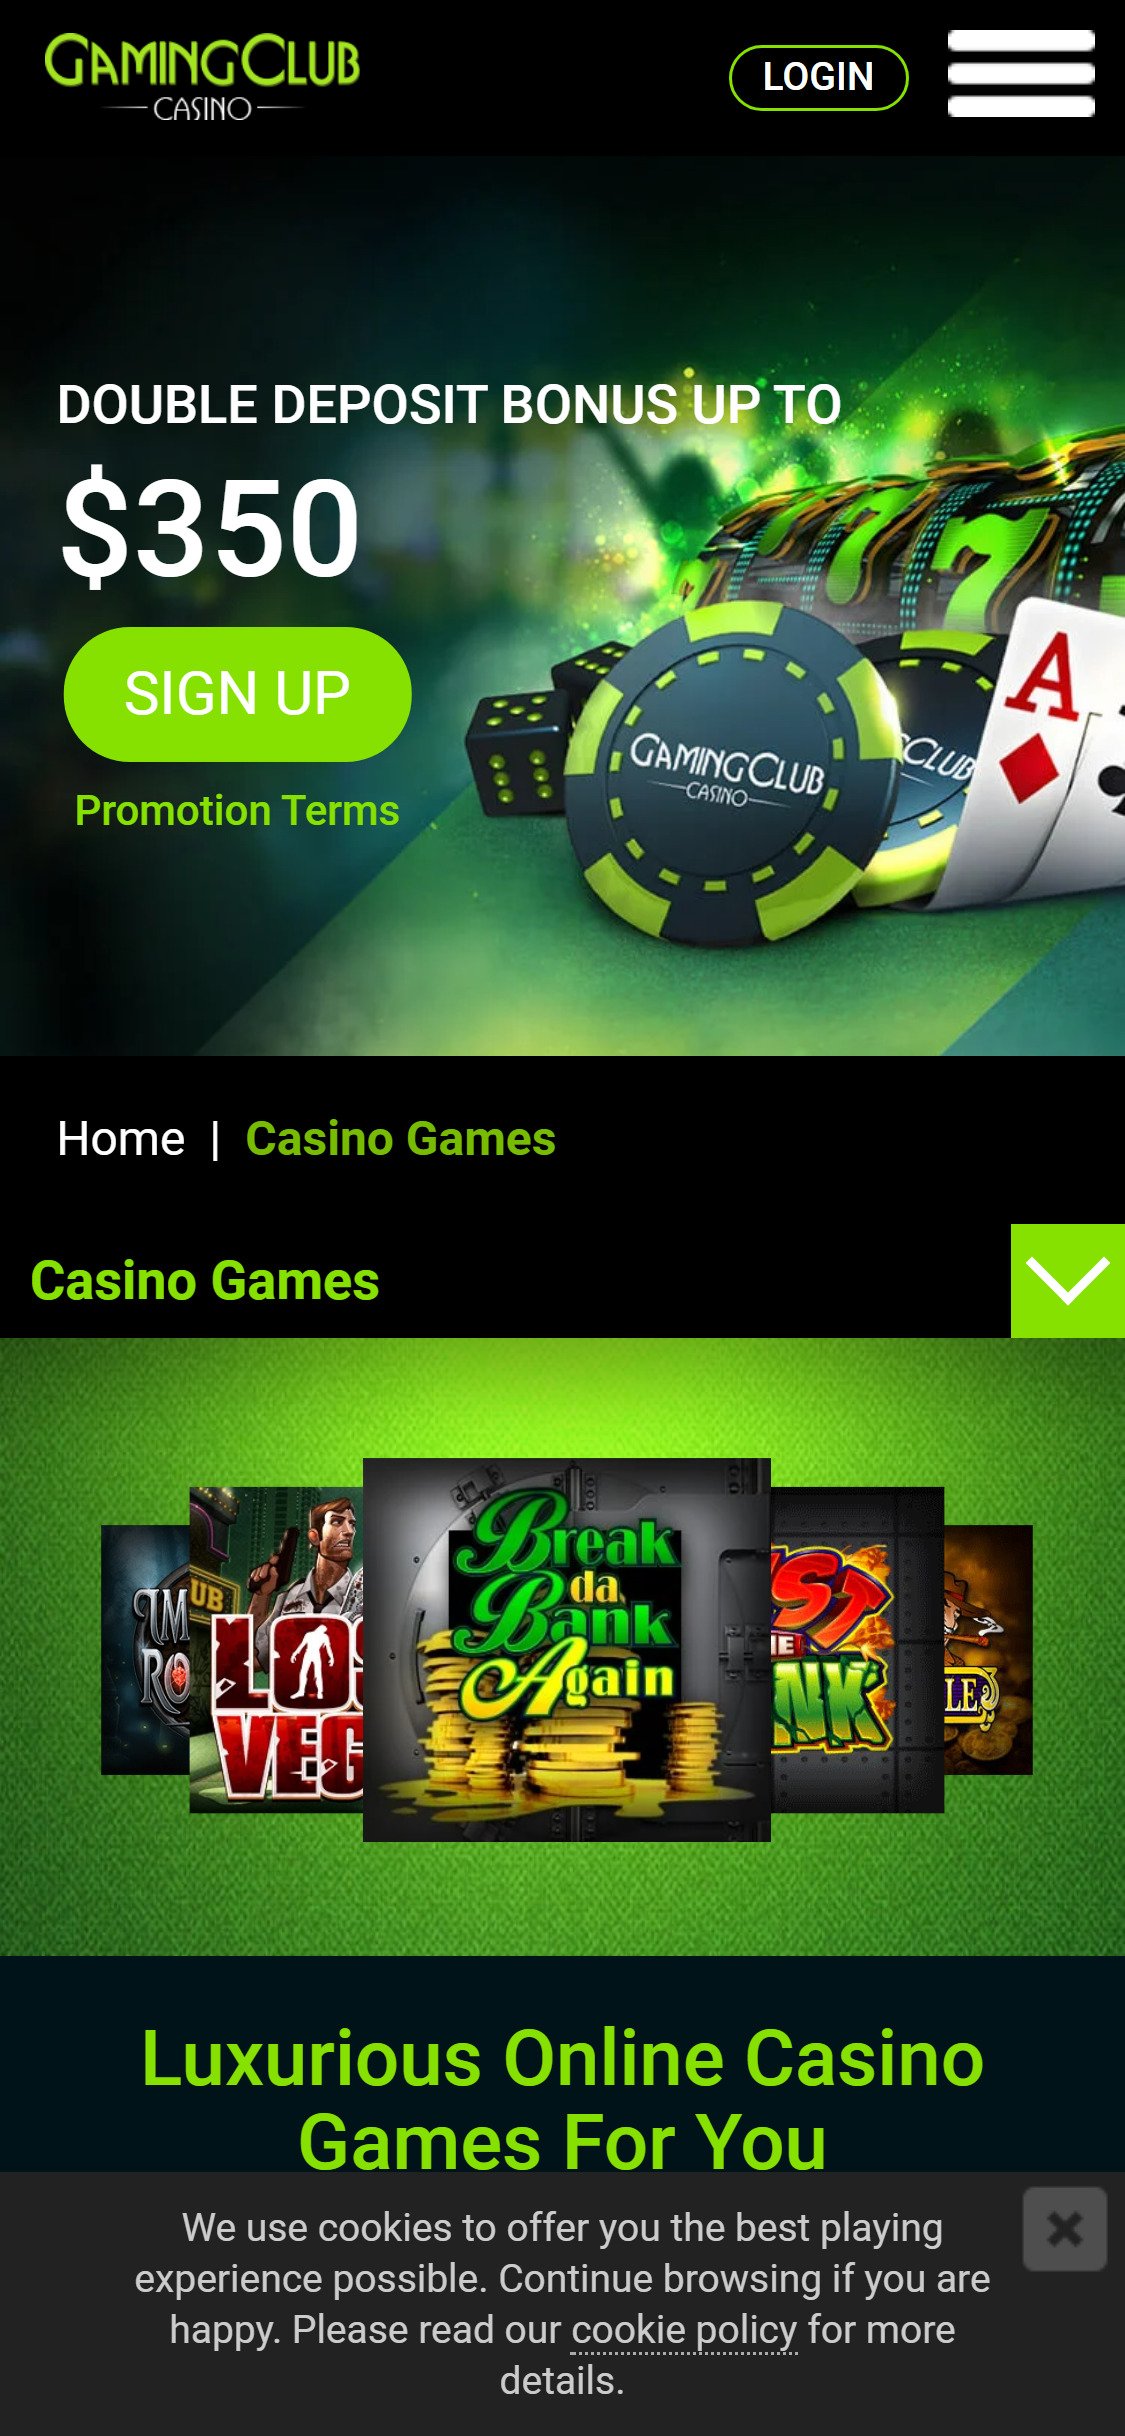 Gaming Club Casino Mobile Games Review